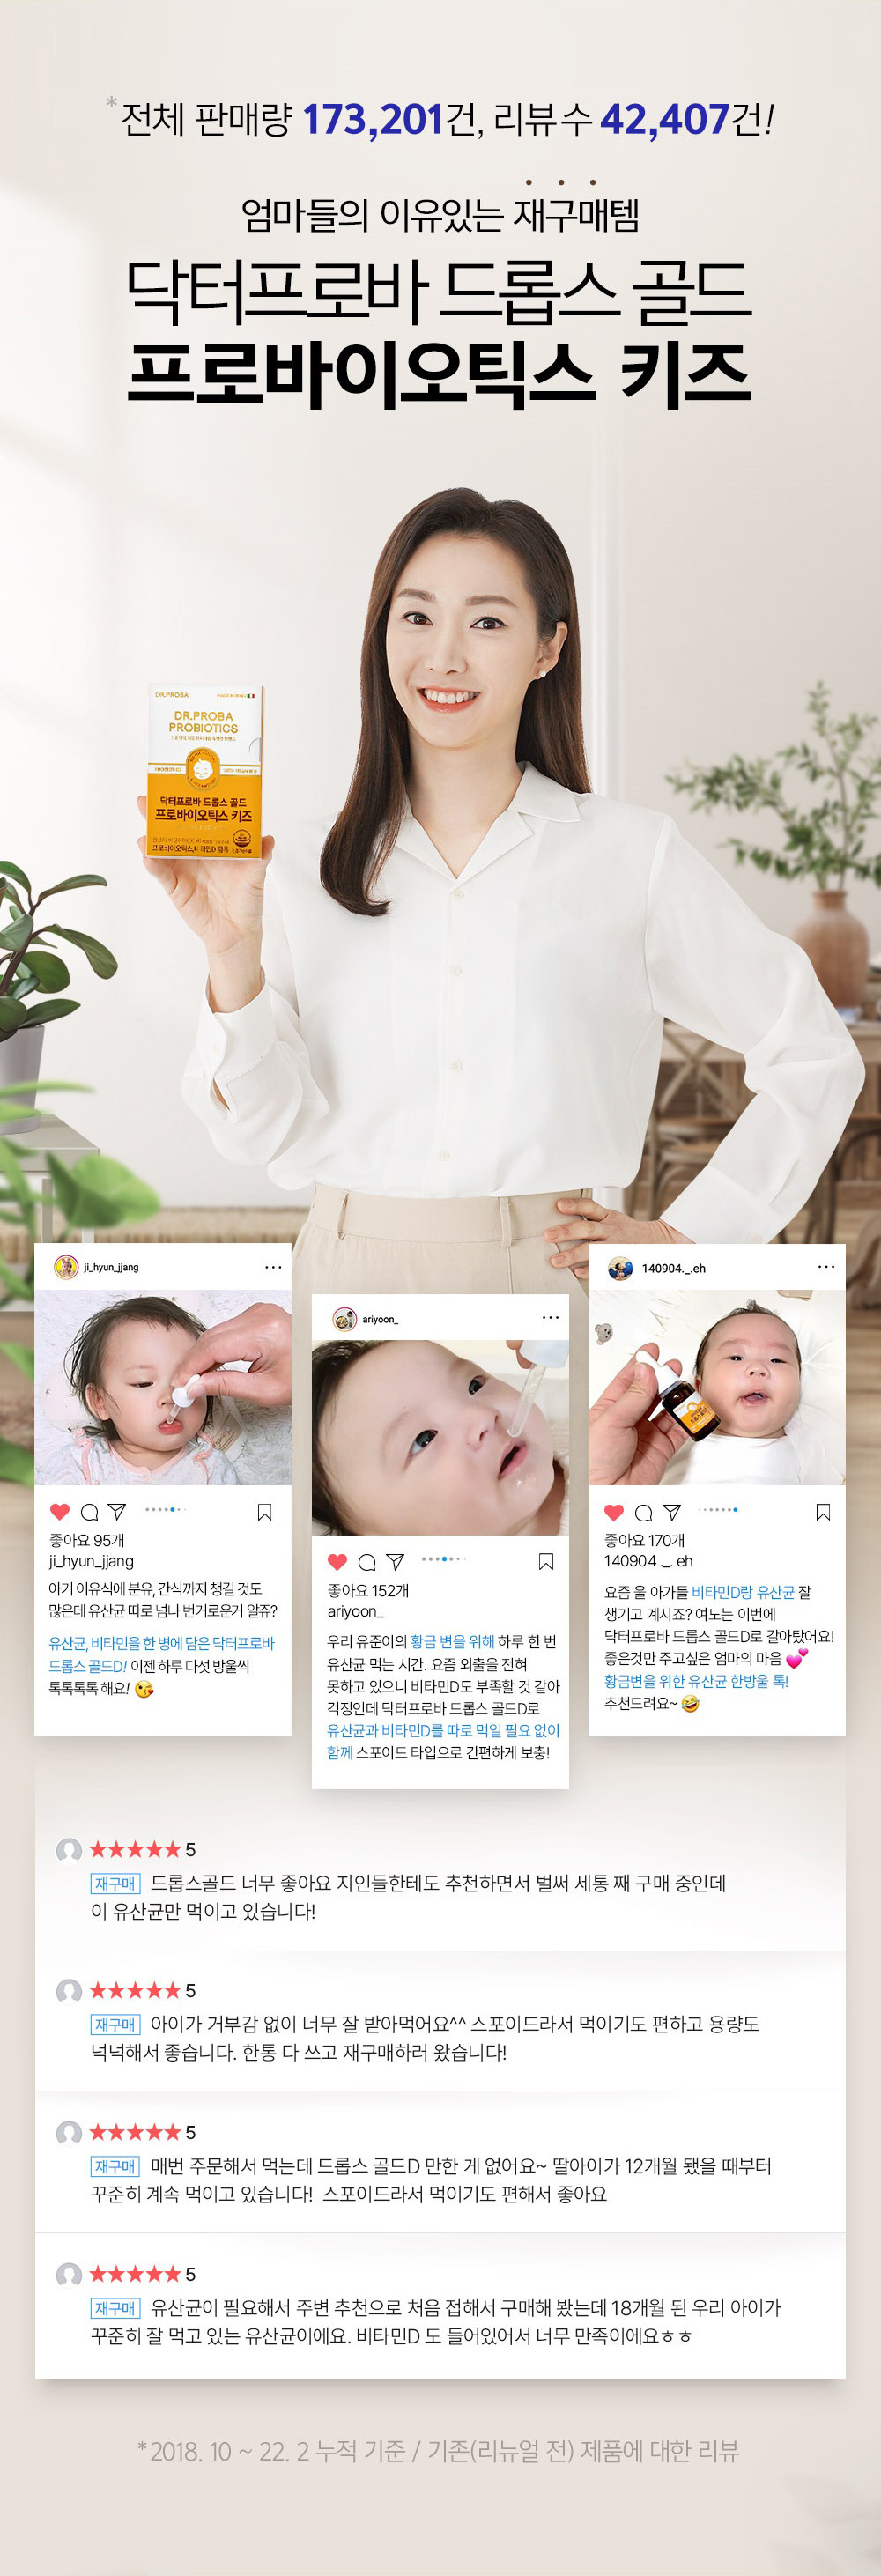 Total sales volume: 173,201, number of reviews: 42,407! Mothers repurchase item with good reason Dr. Prova Drops Gold Probiotics Kids 95 likes ji_hyun_jjang There are a lot of things to buy from baby food to powdered milk and snacks, but you know how cumbersome it is to separate lactic acid bacteria, right? Dr. Prova Drops Gold D contains lactic acid bacteria and vitamins in one bottle. Now, five drops a day are especially effective. 152 likes ariyoon. It's time to eat lactic acid bacteria once a day for our Yujun's golden stool. Since I can't go out at all these days, I'm worried that I might be lacking in vitamin D. With Dr. Provadrops Gold D, you can easily supplement lactic acid bacteria and vitamin D together with a dropper type without having to feed them separately! 170 likes 140904 These days, your babies are getting a good dose of vitamin D and lactic acid bacteria, right? Yeono switched to Dr. Proba Drops Gold D this time! A mother who wants to give only good things, a drop of lactic acid bacteria for golden stool! I recommend it~ ★★★★★5 I really like Drops Gold. I am recommending it to my friends and am already purchasing my third bottle, and I am only feeding them this probiotic! ★★★★★5 My child took it very well without any resistance. It is easy to feed because it is a dropper, and the capacity is generous. I used up one bottle and came back to buy it again! ★★★★★5 I order it every time. Is there anything like Drops Gold D? I have been feeding my daughter consistently since she was 12 months old! I like it because it's a dropper so it's easy to feed. ★★★★★5 I needed lactic acid bacteria, so I bought it for the first time based on a recommendation from a friend. My 18-month-old child is eating it well on a regular basis. I am very satisfied because it also contains vitamin D. *2018.10 ? 22. 2 Cumulative basis / Reviews of existing (before renewal) products